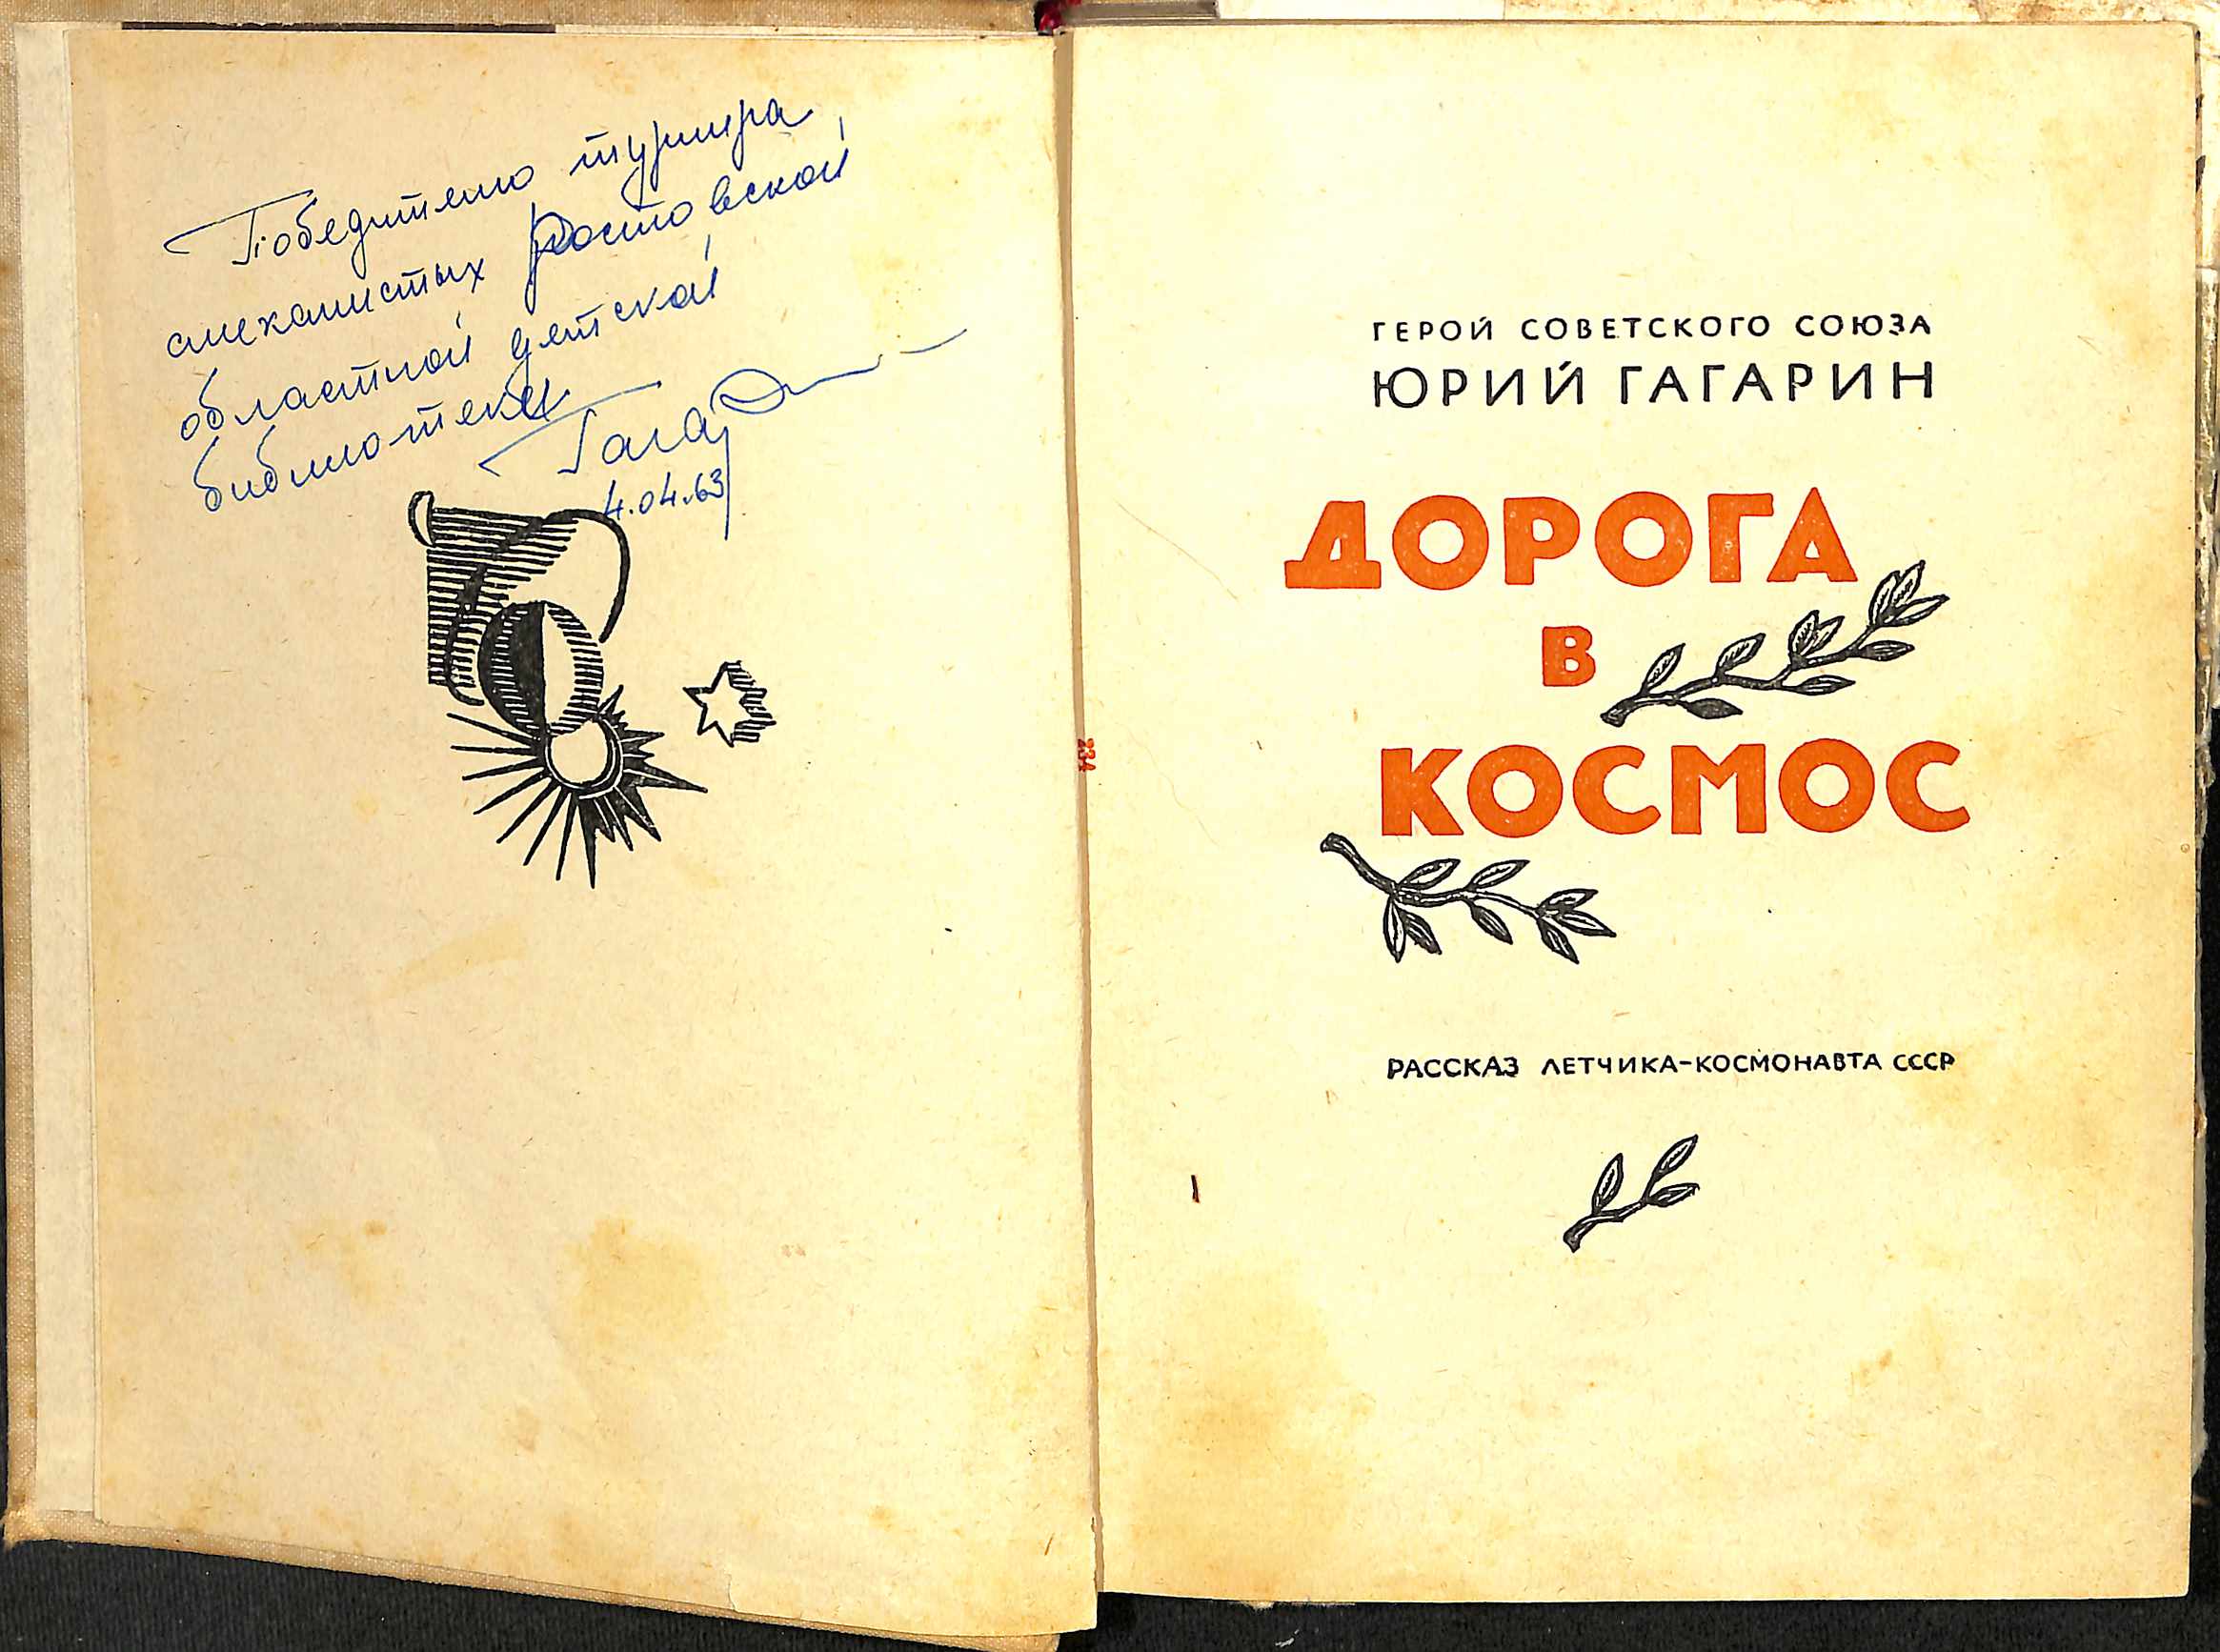 Space - Yury Gagarin. 1963 Hardback book in Russian "Road to Cosmos" by Yury Gagarin, signed and